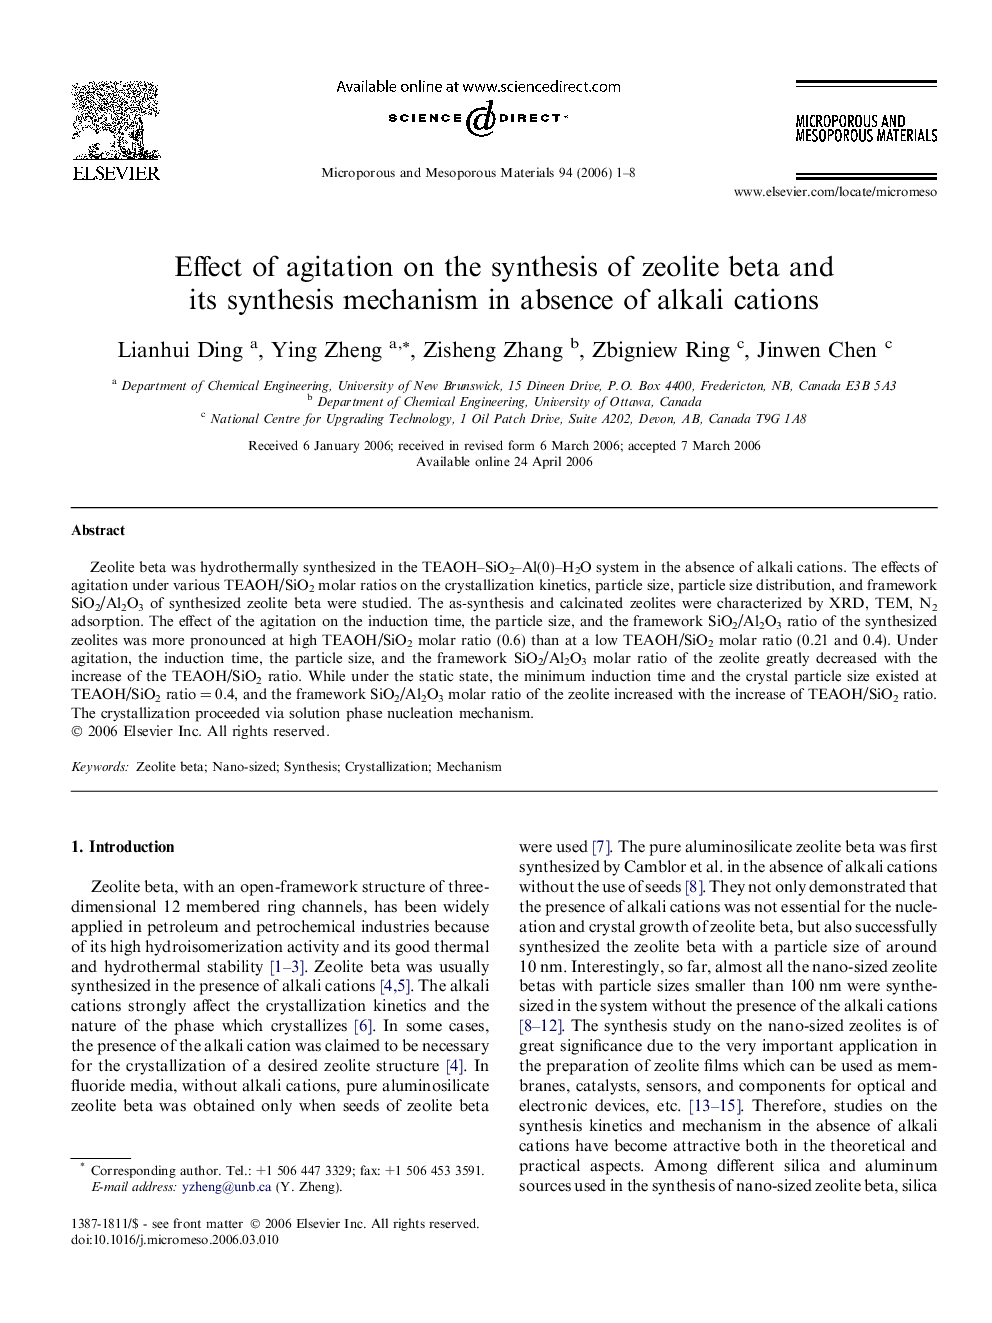 Effect of agitation on the synthesis of zeolite beta and its synthesis mechanism in absence of alkali cations